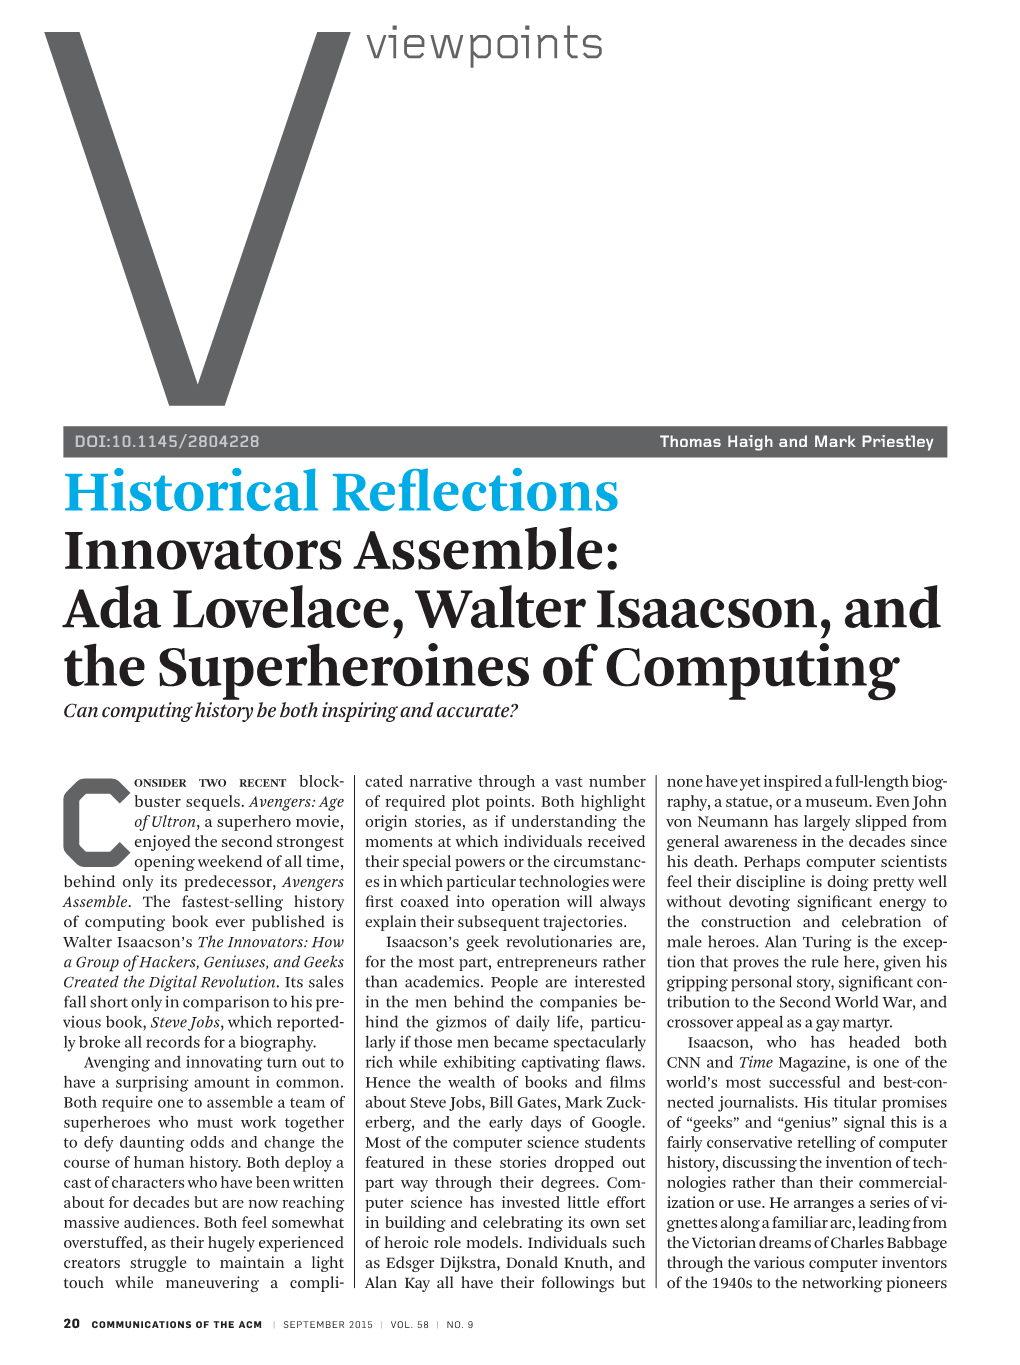 Historical Reflections Innovators Assemble: Ada Lovelace, Walter Isaacson, and the Superheroines of Computing Can Computing History Be Both Inspiring and Accurate?